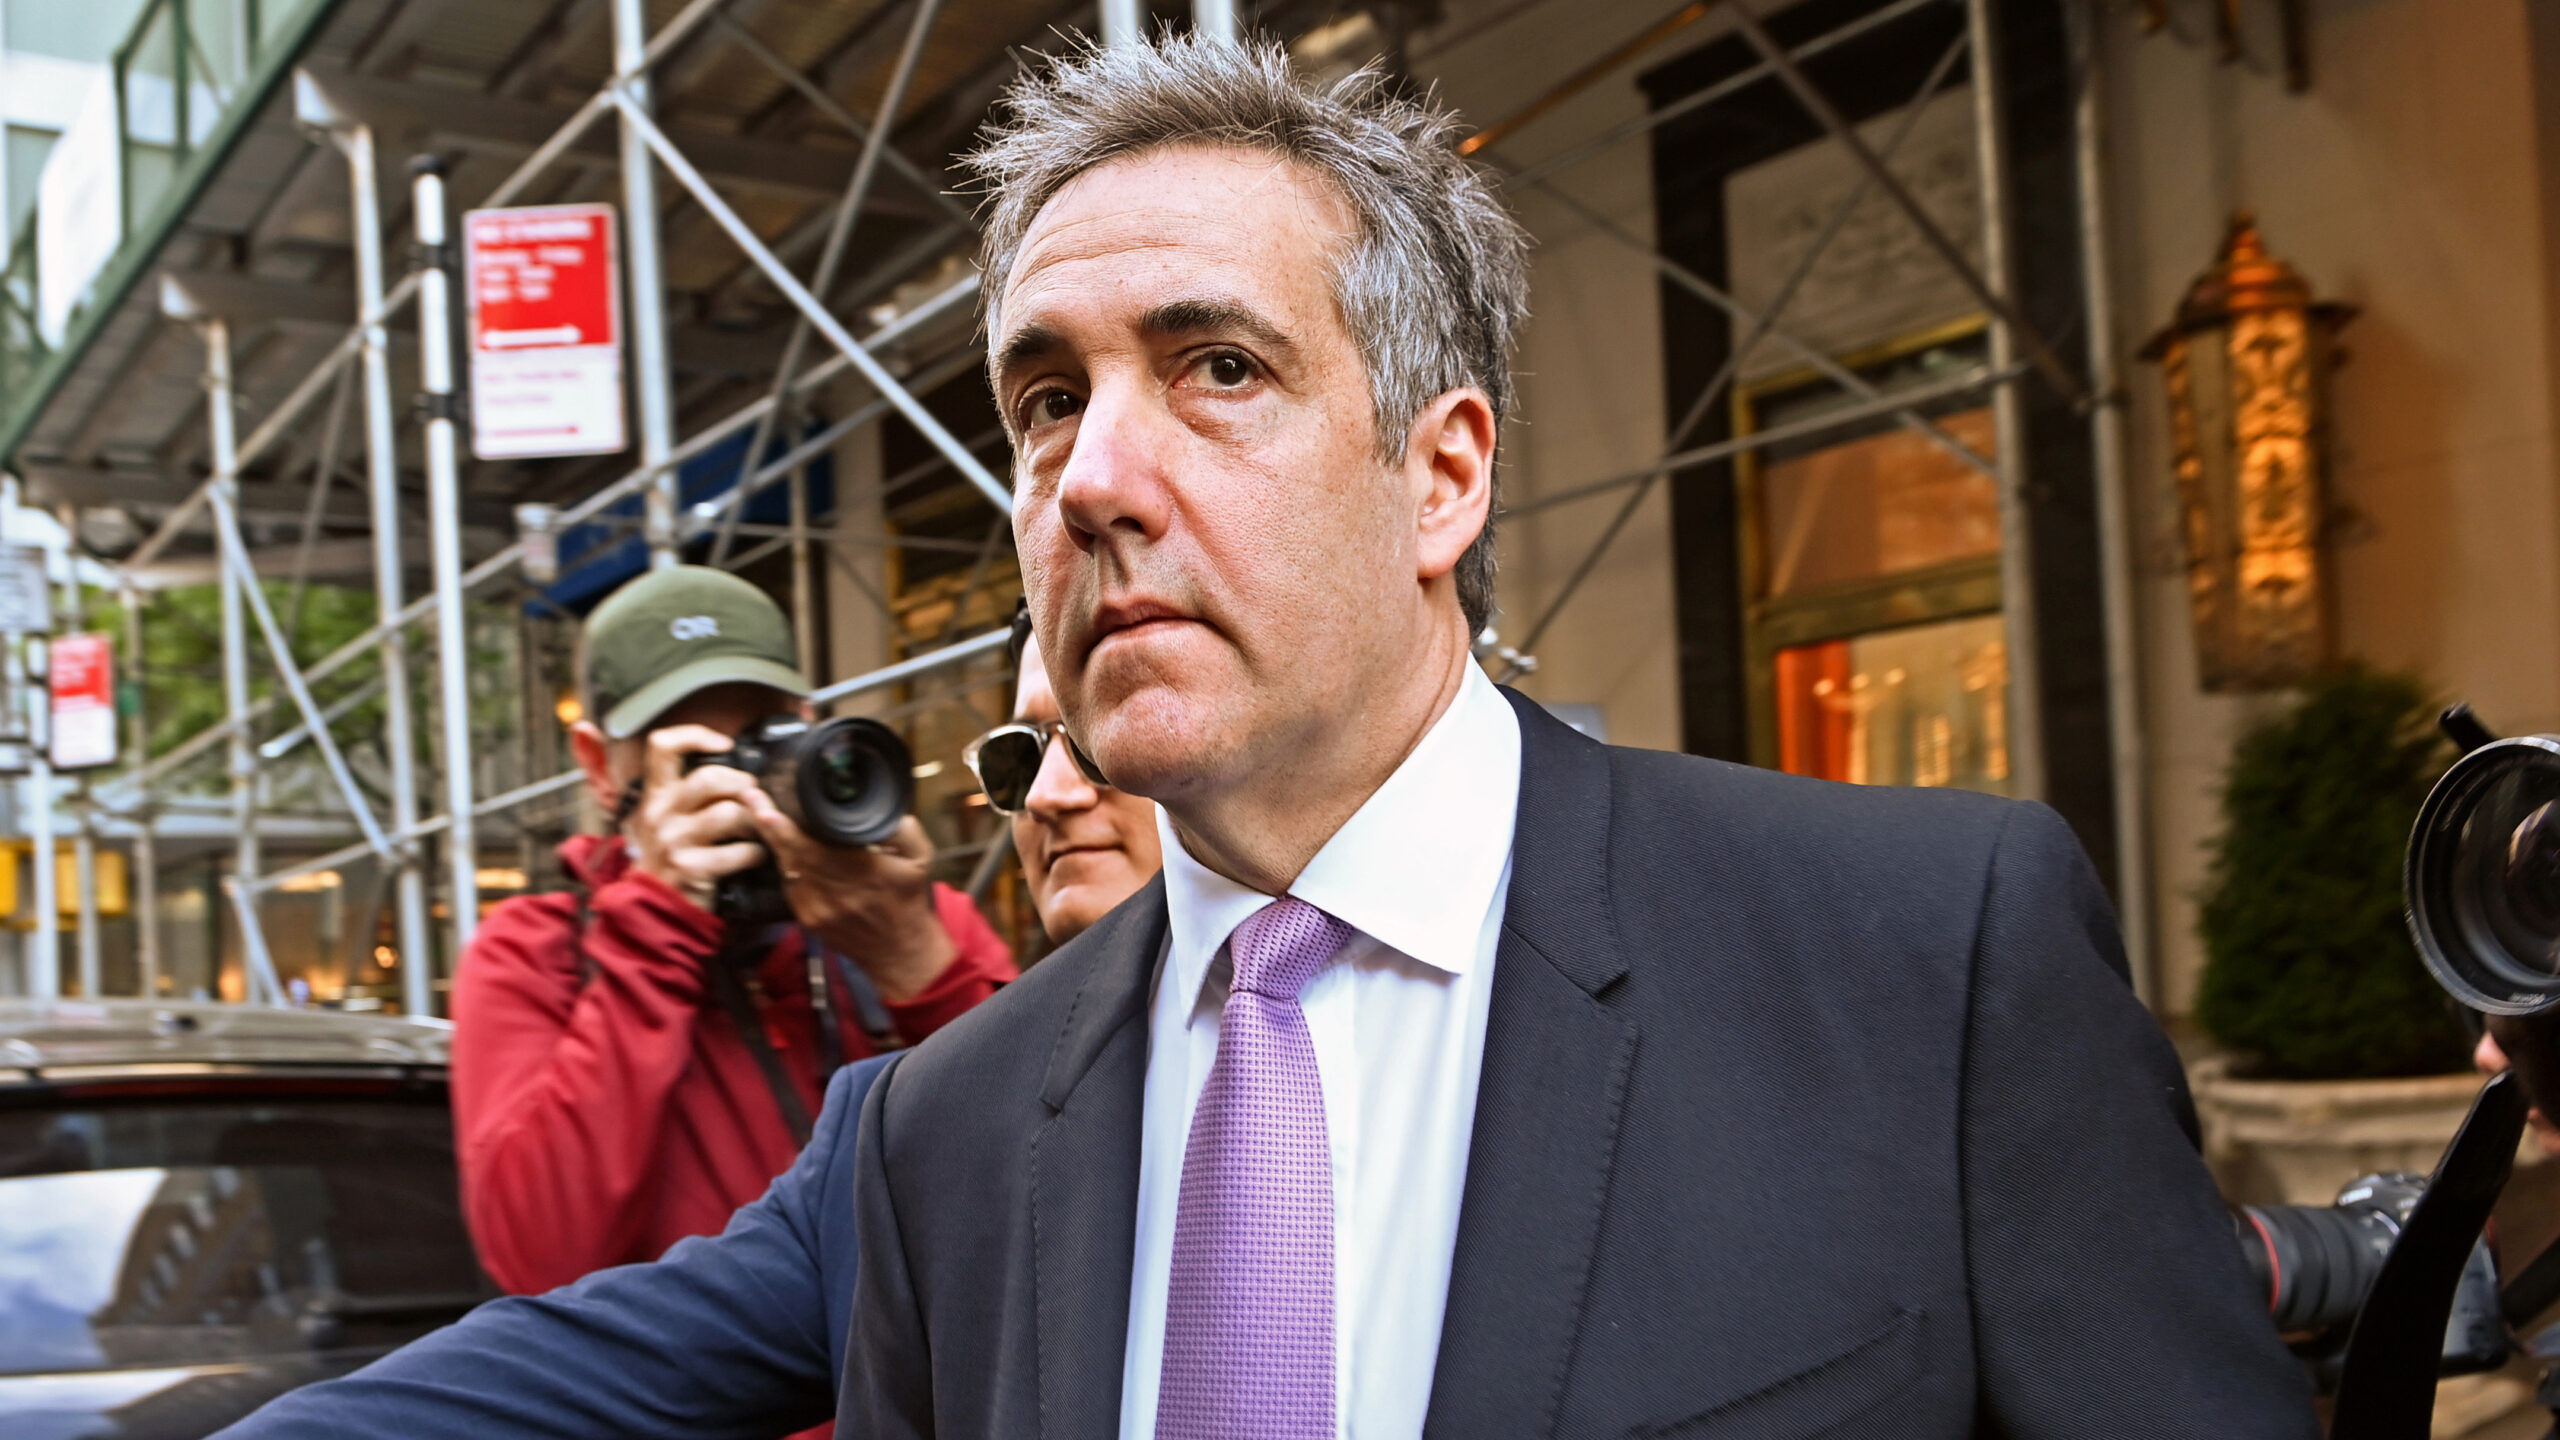 CNN Analyst questions Cohen’s credibility after admitted crime, raises concerns on ties with prosecutors